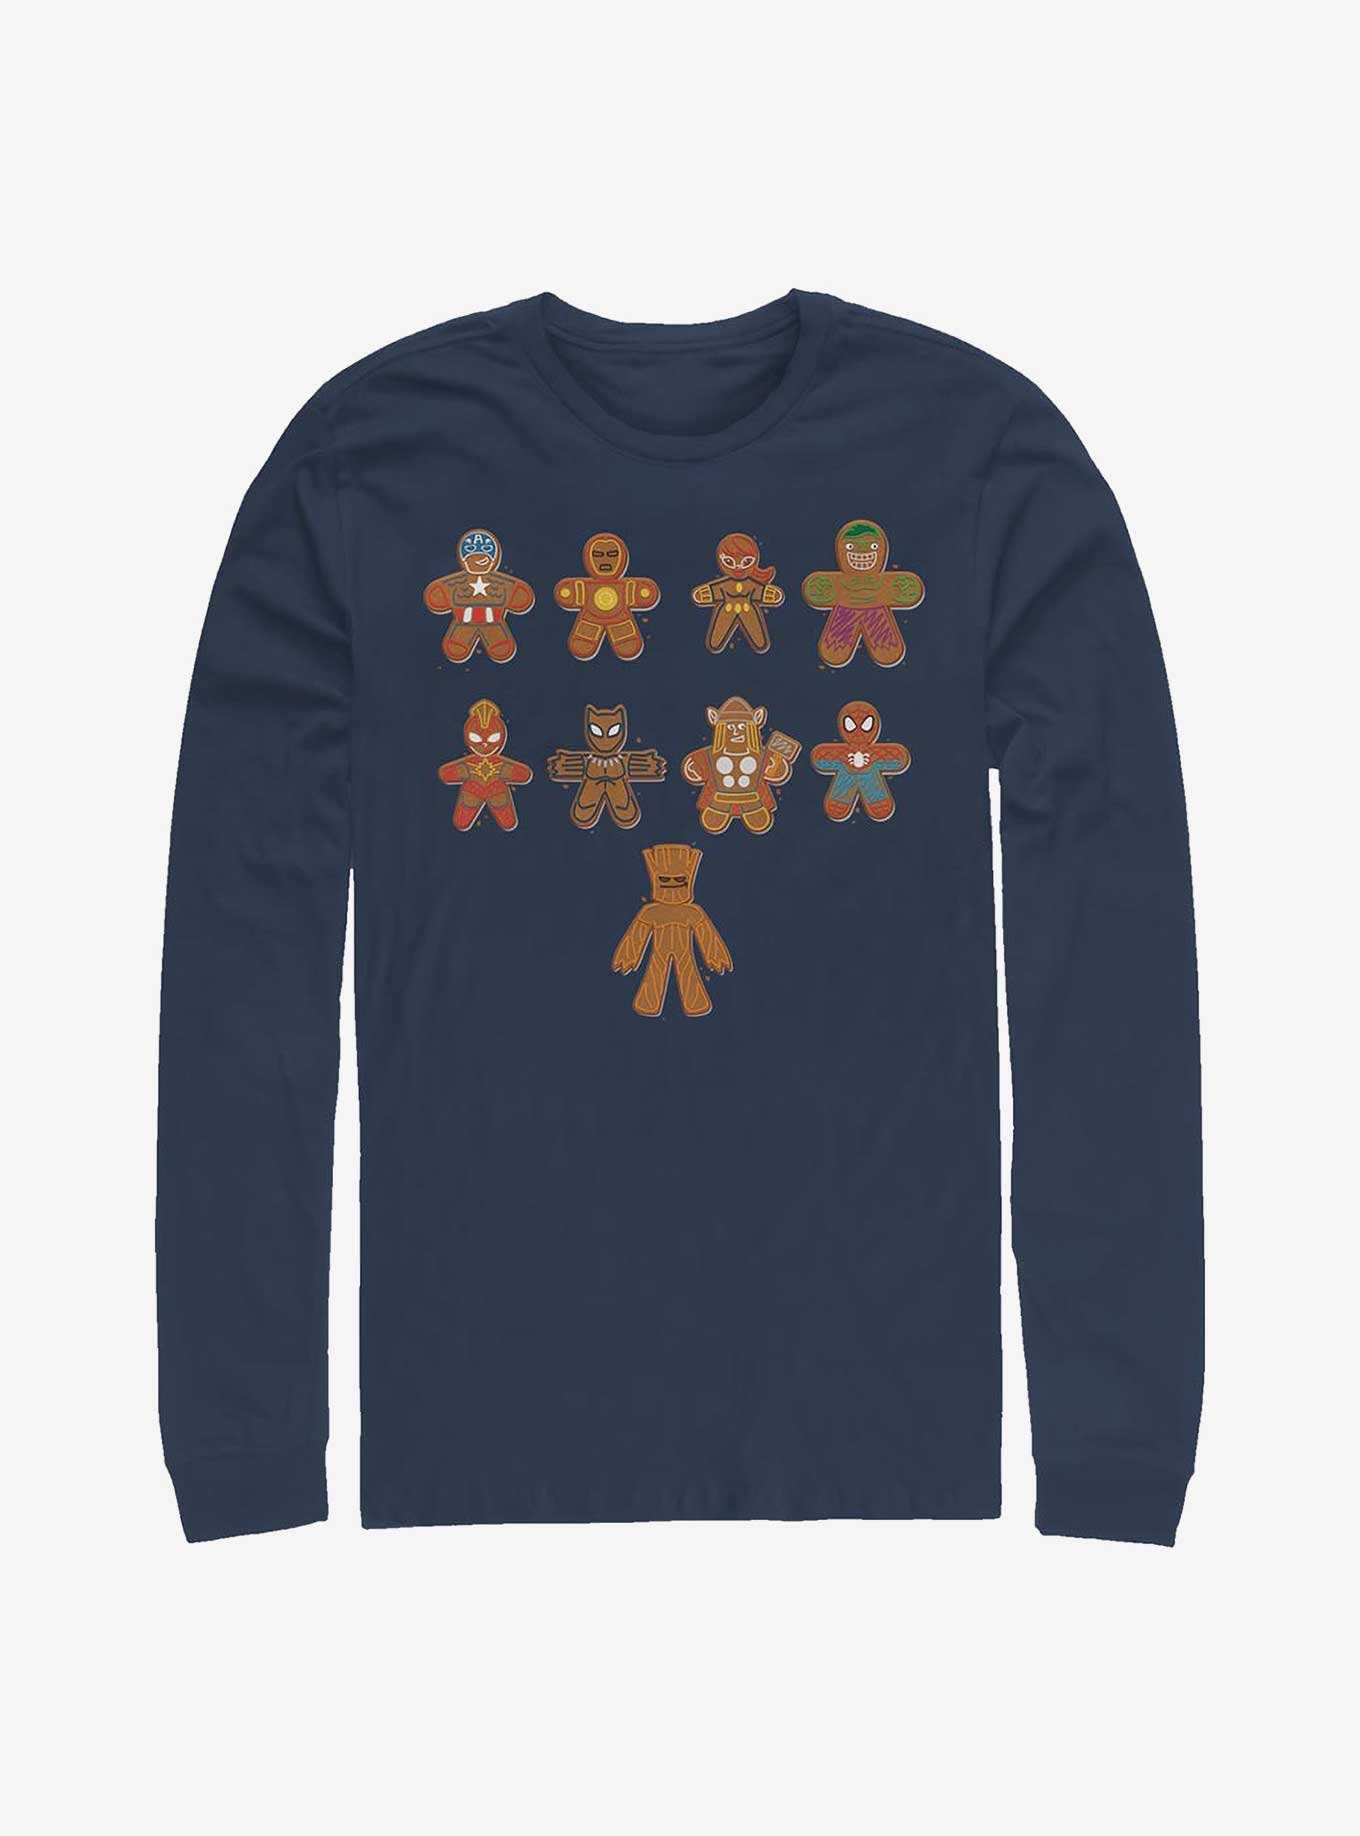 Marvel Lined Up Cookies Long-Sleeve T-Shirt, , hi-res